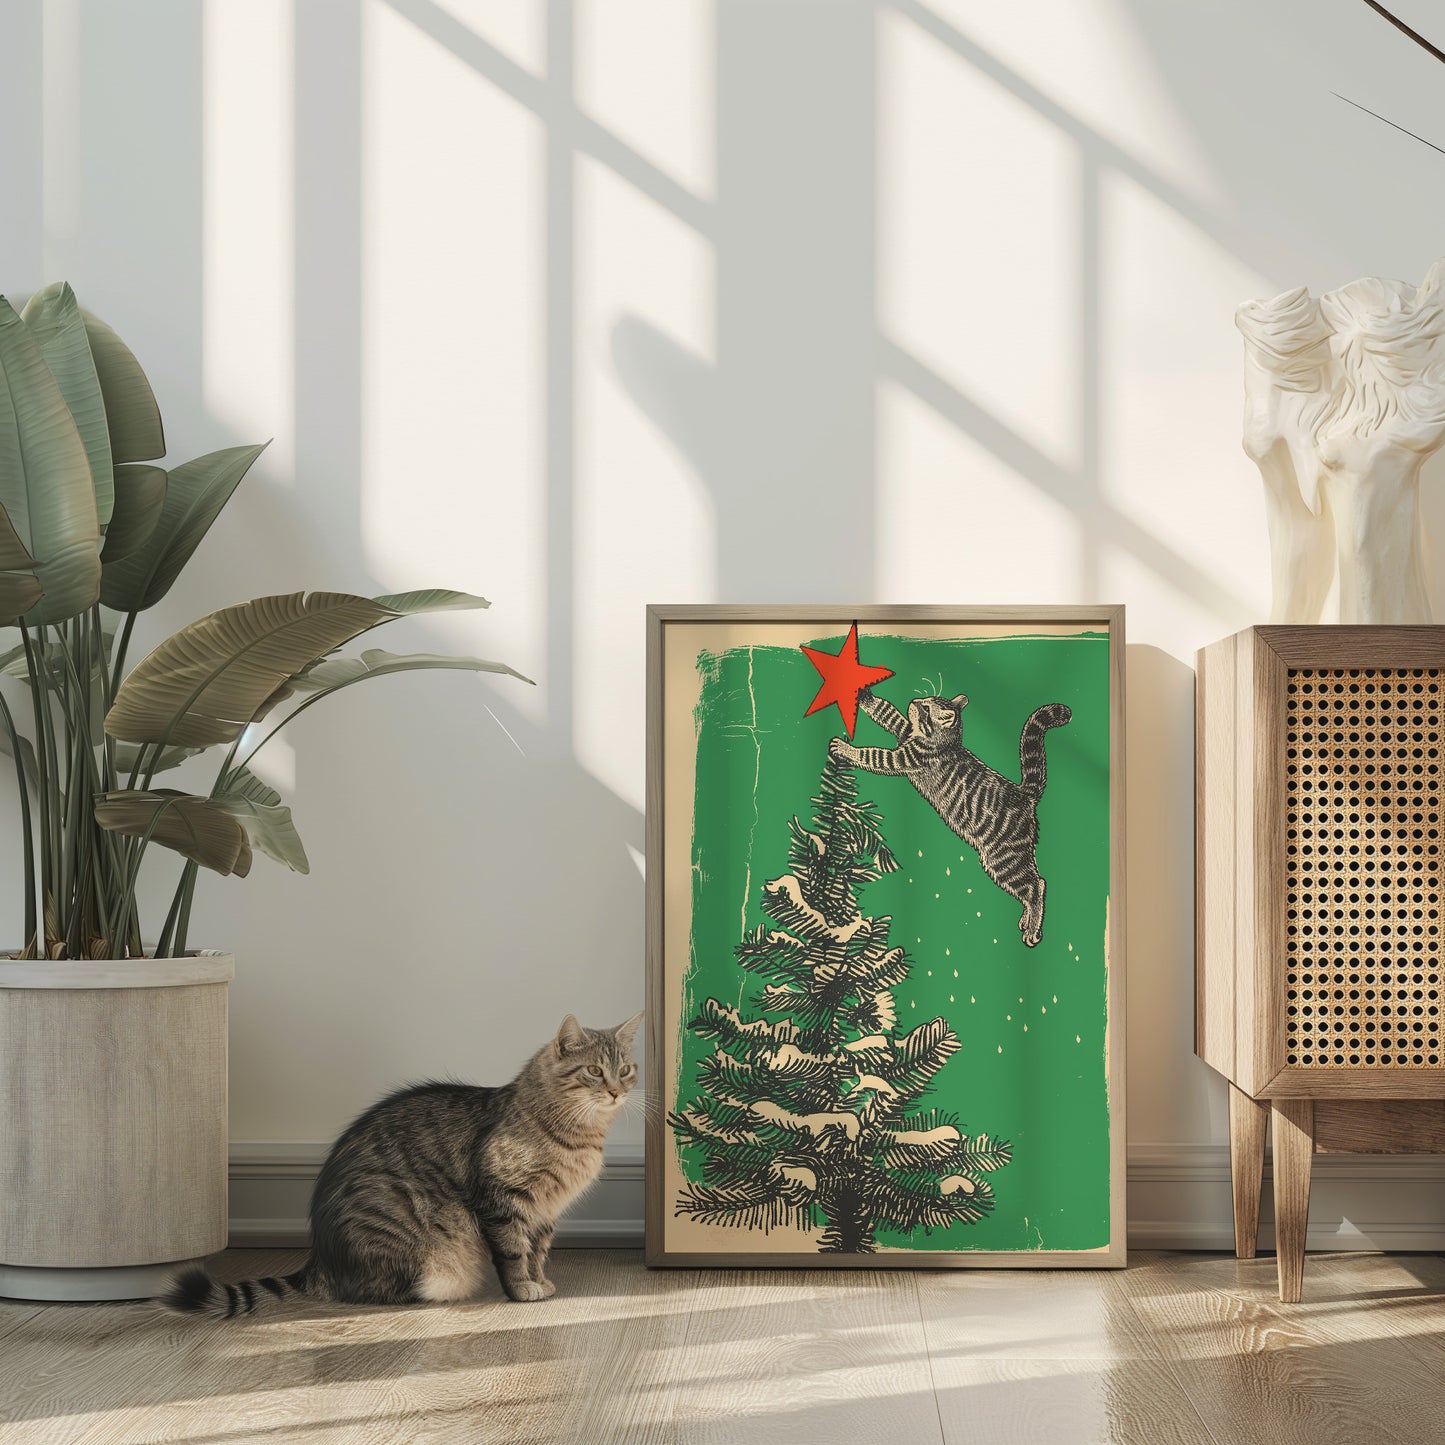 A cat staring at a framed picture of a cat jumping towards a Christmas tree.